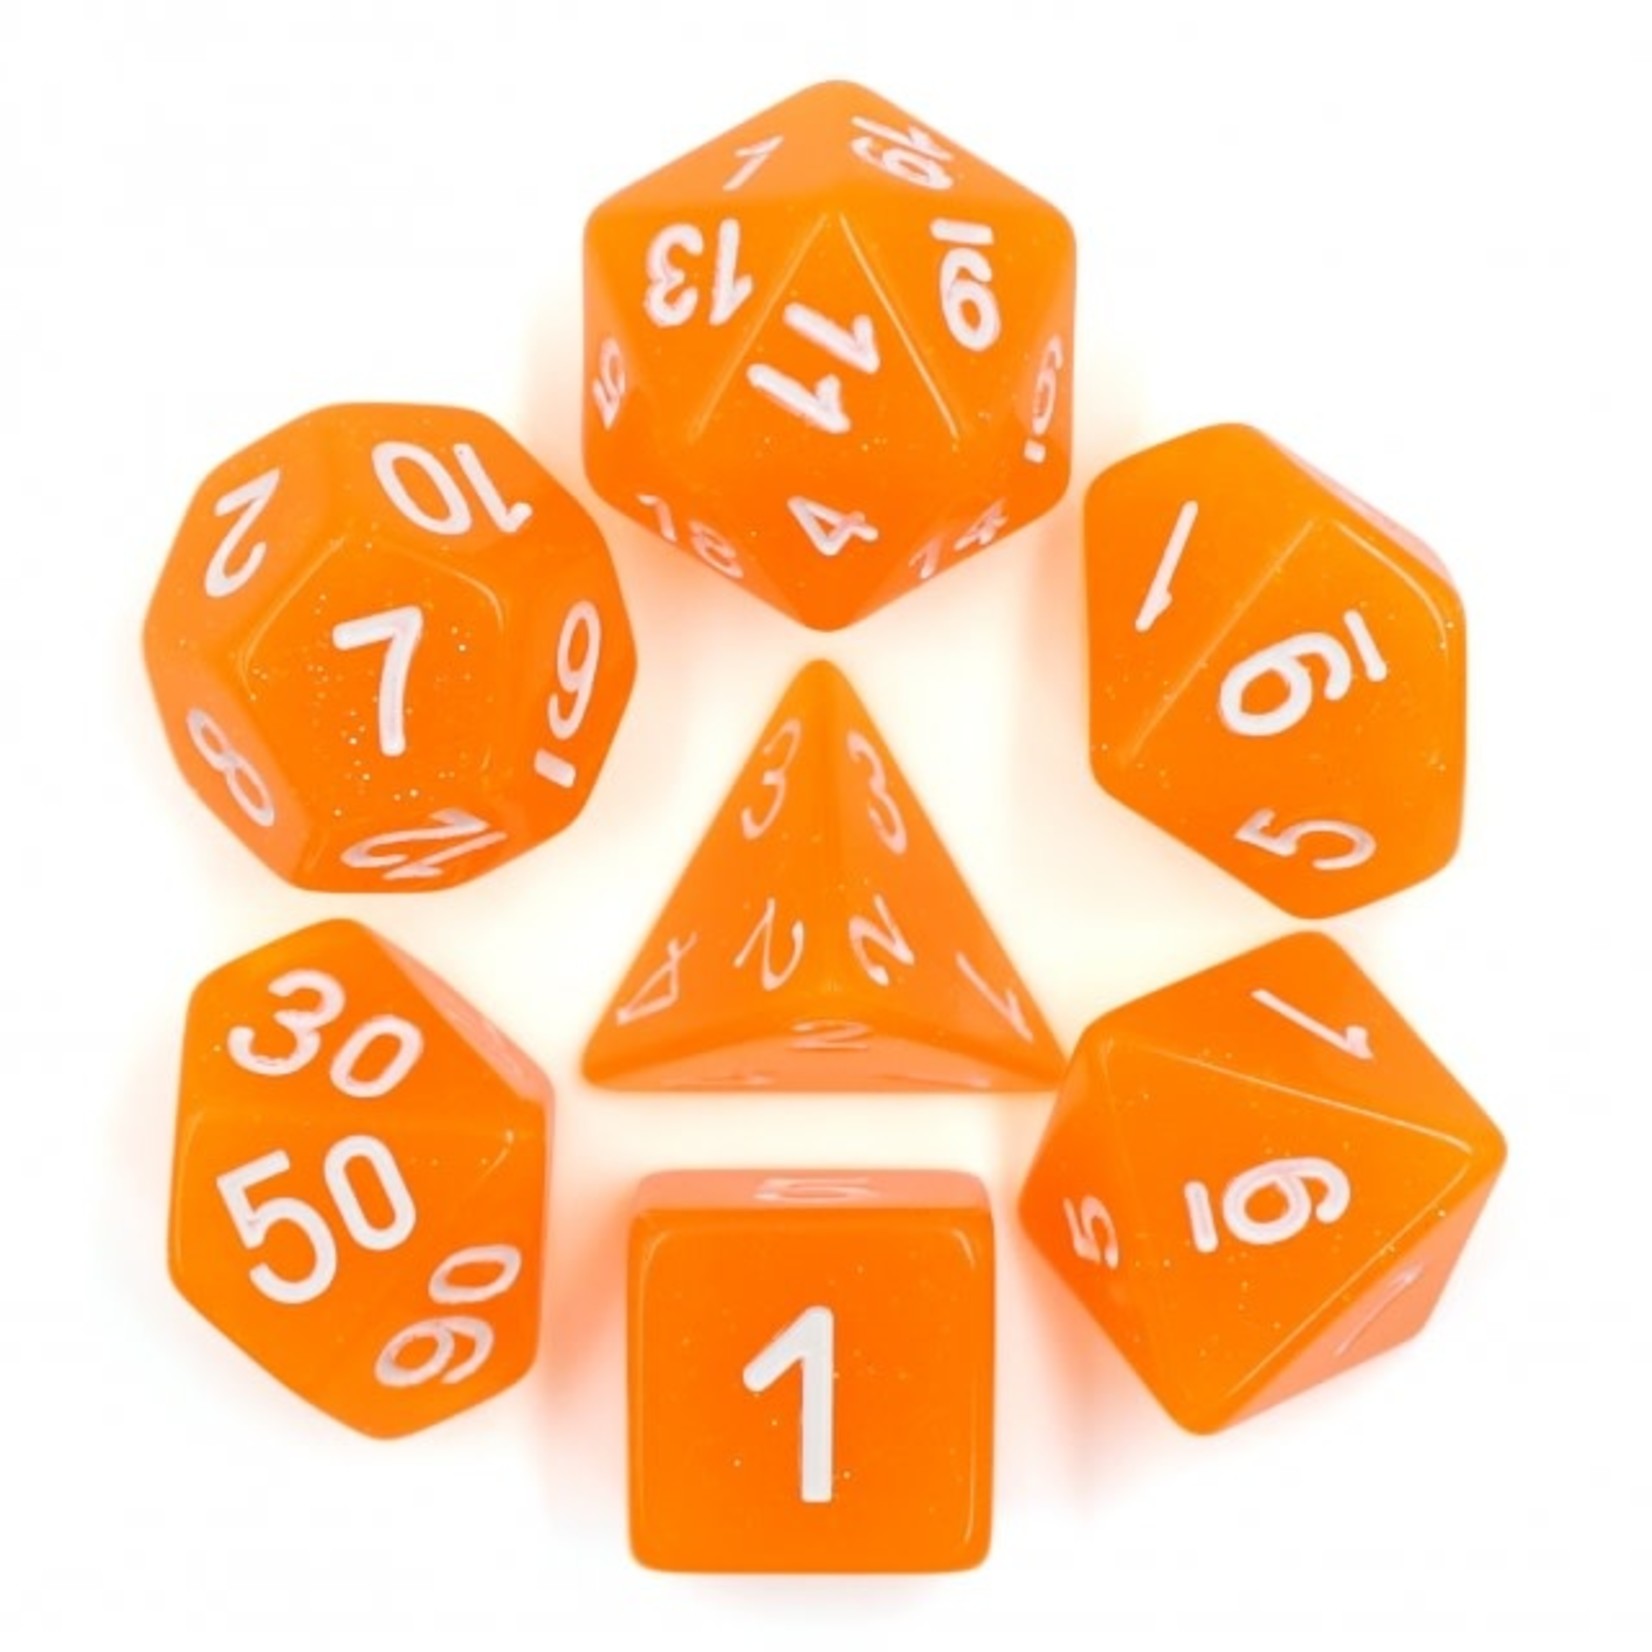 HD Dice 7-Set Translucent Orange Glitter with White Numbers (HD)